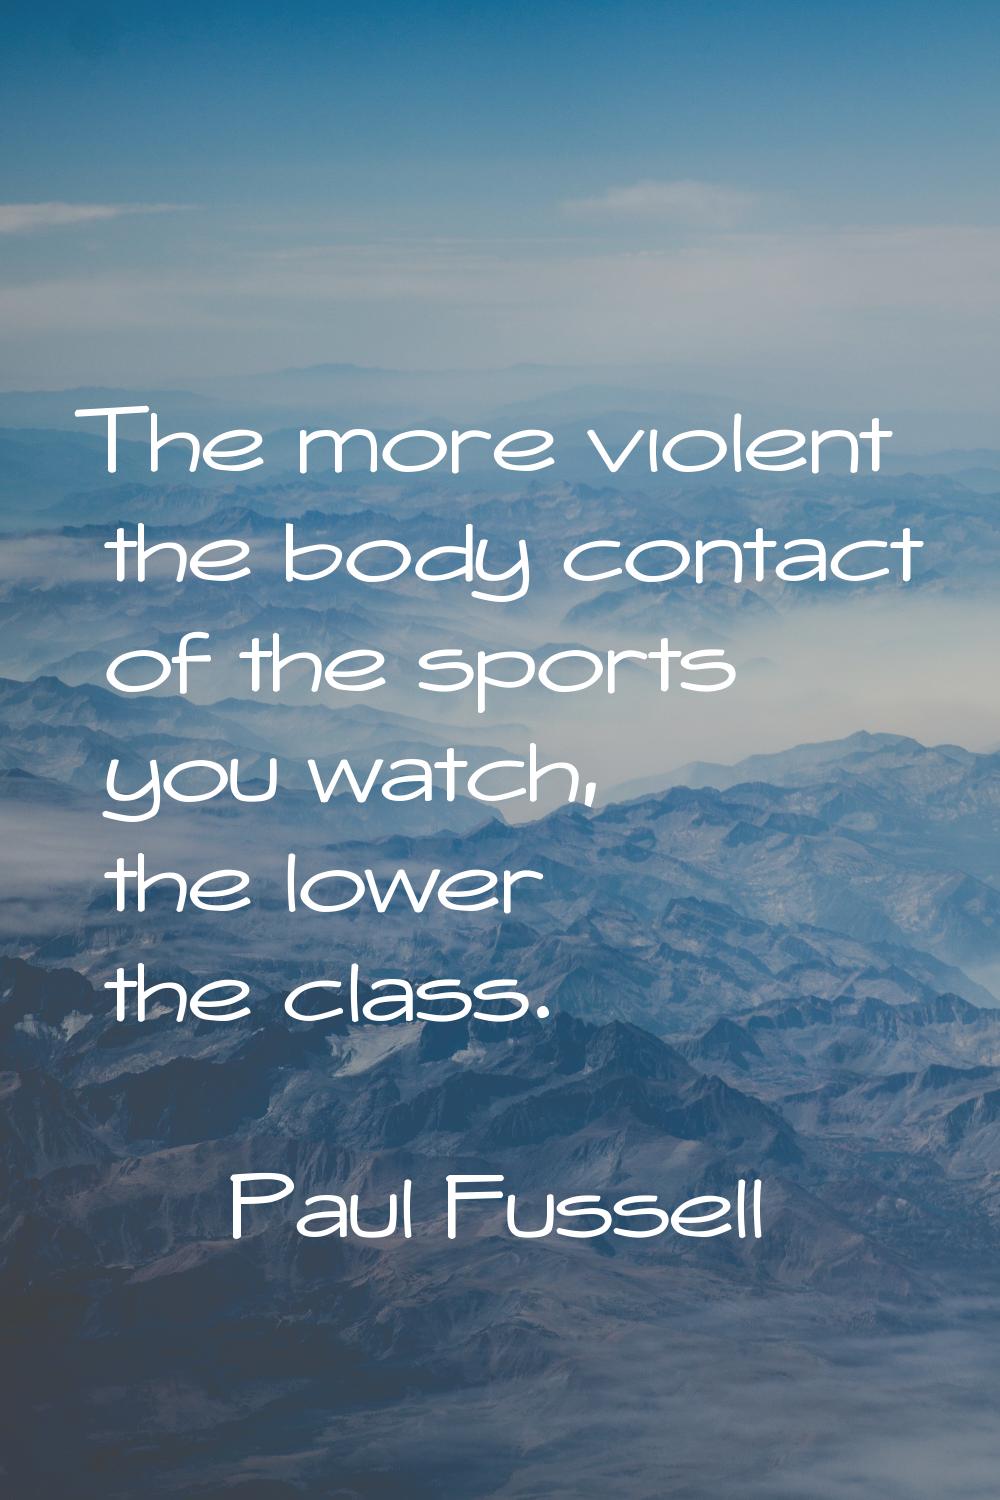 The more violent the body contact of the sports you watch, the lower the class.